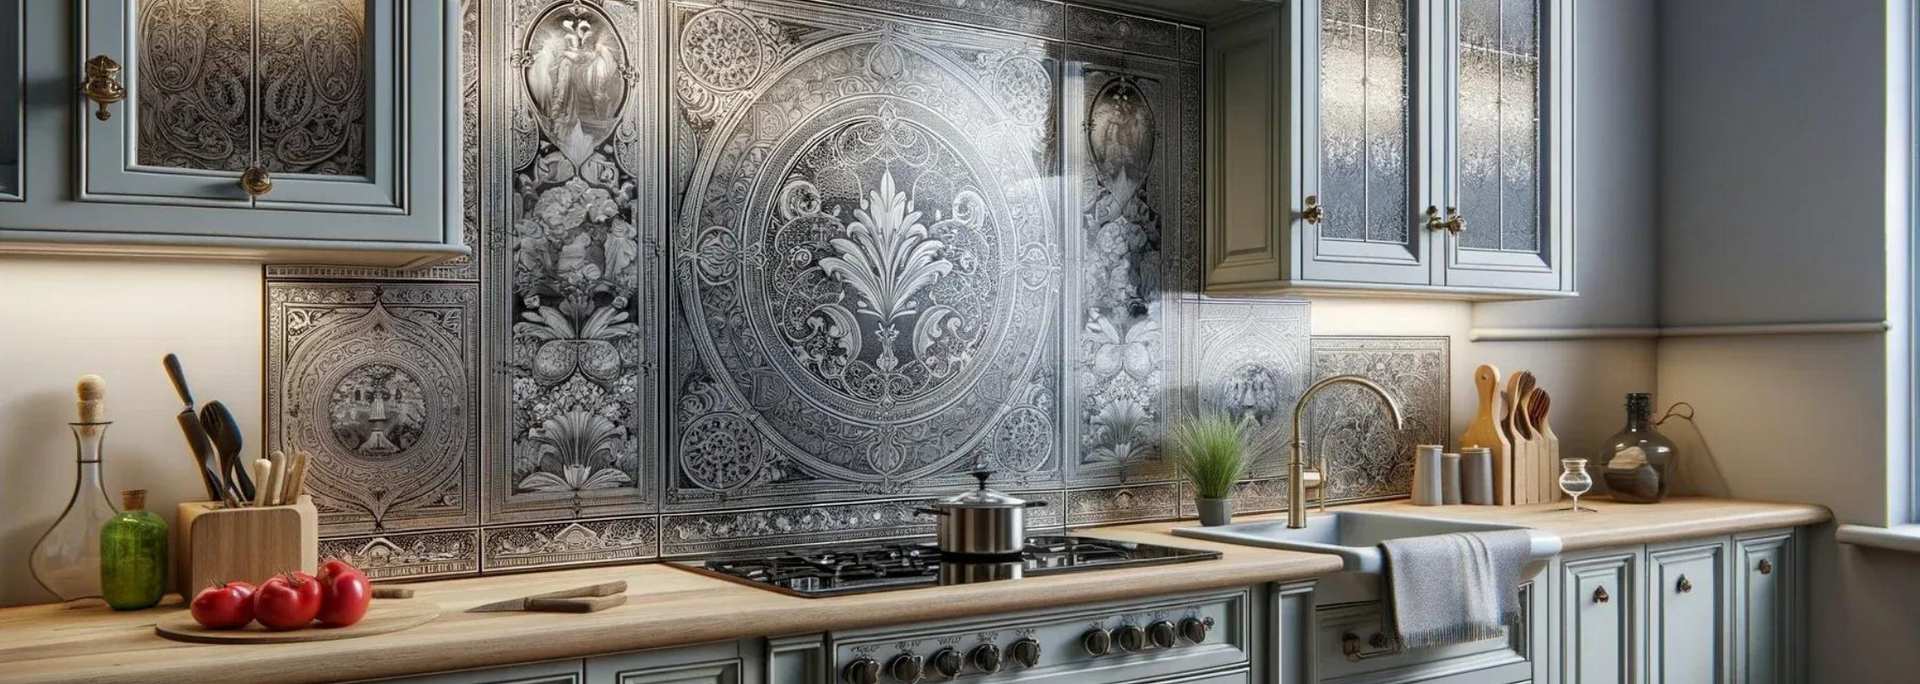 Picture of a mirrored splashback.
